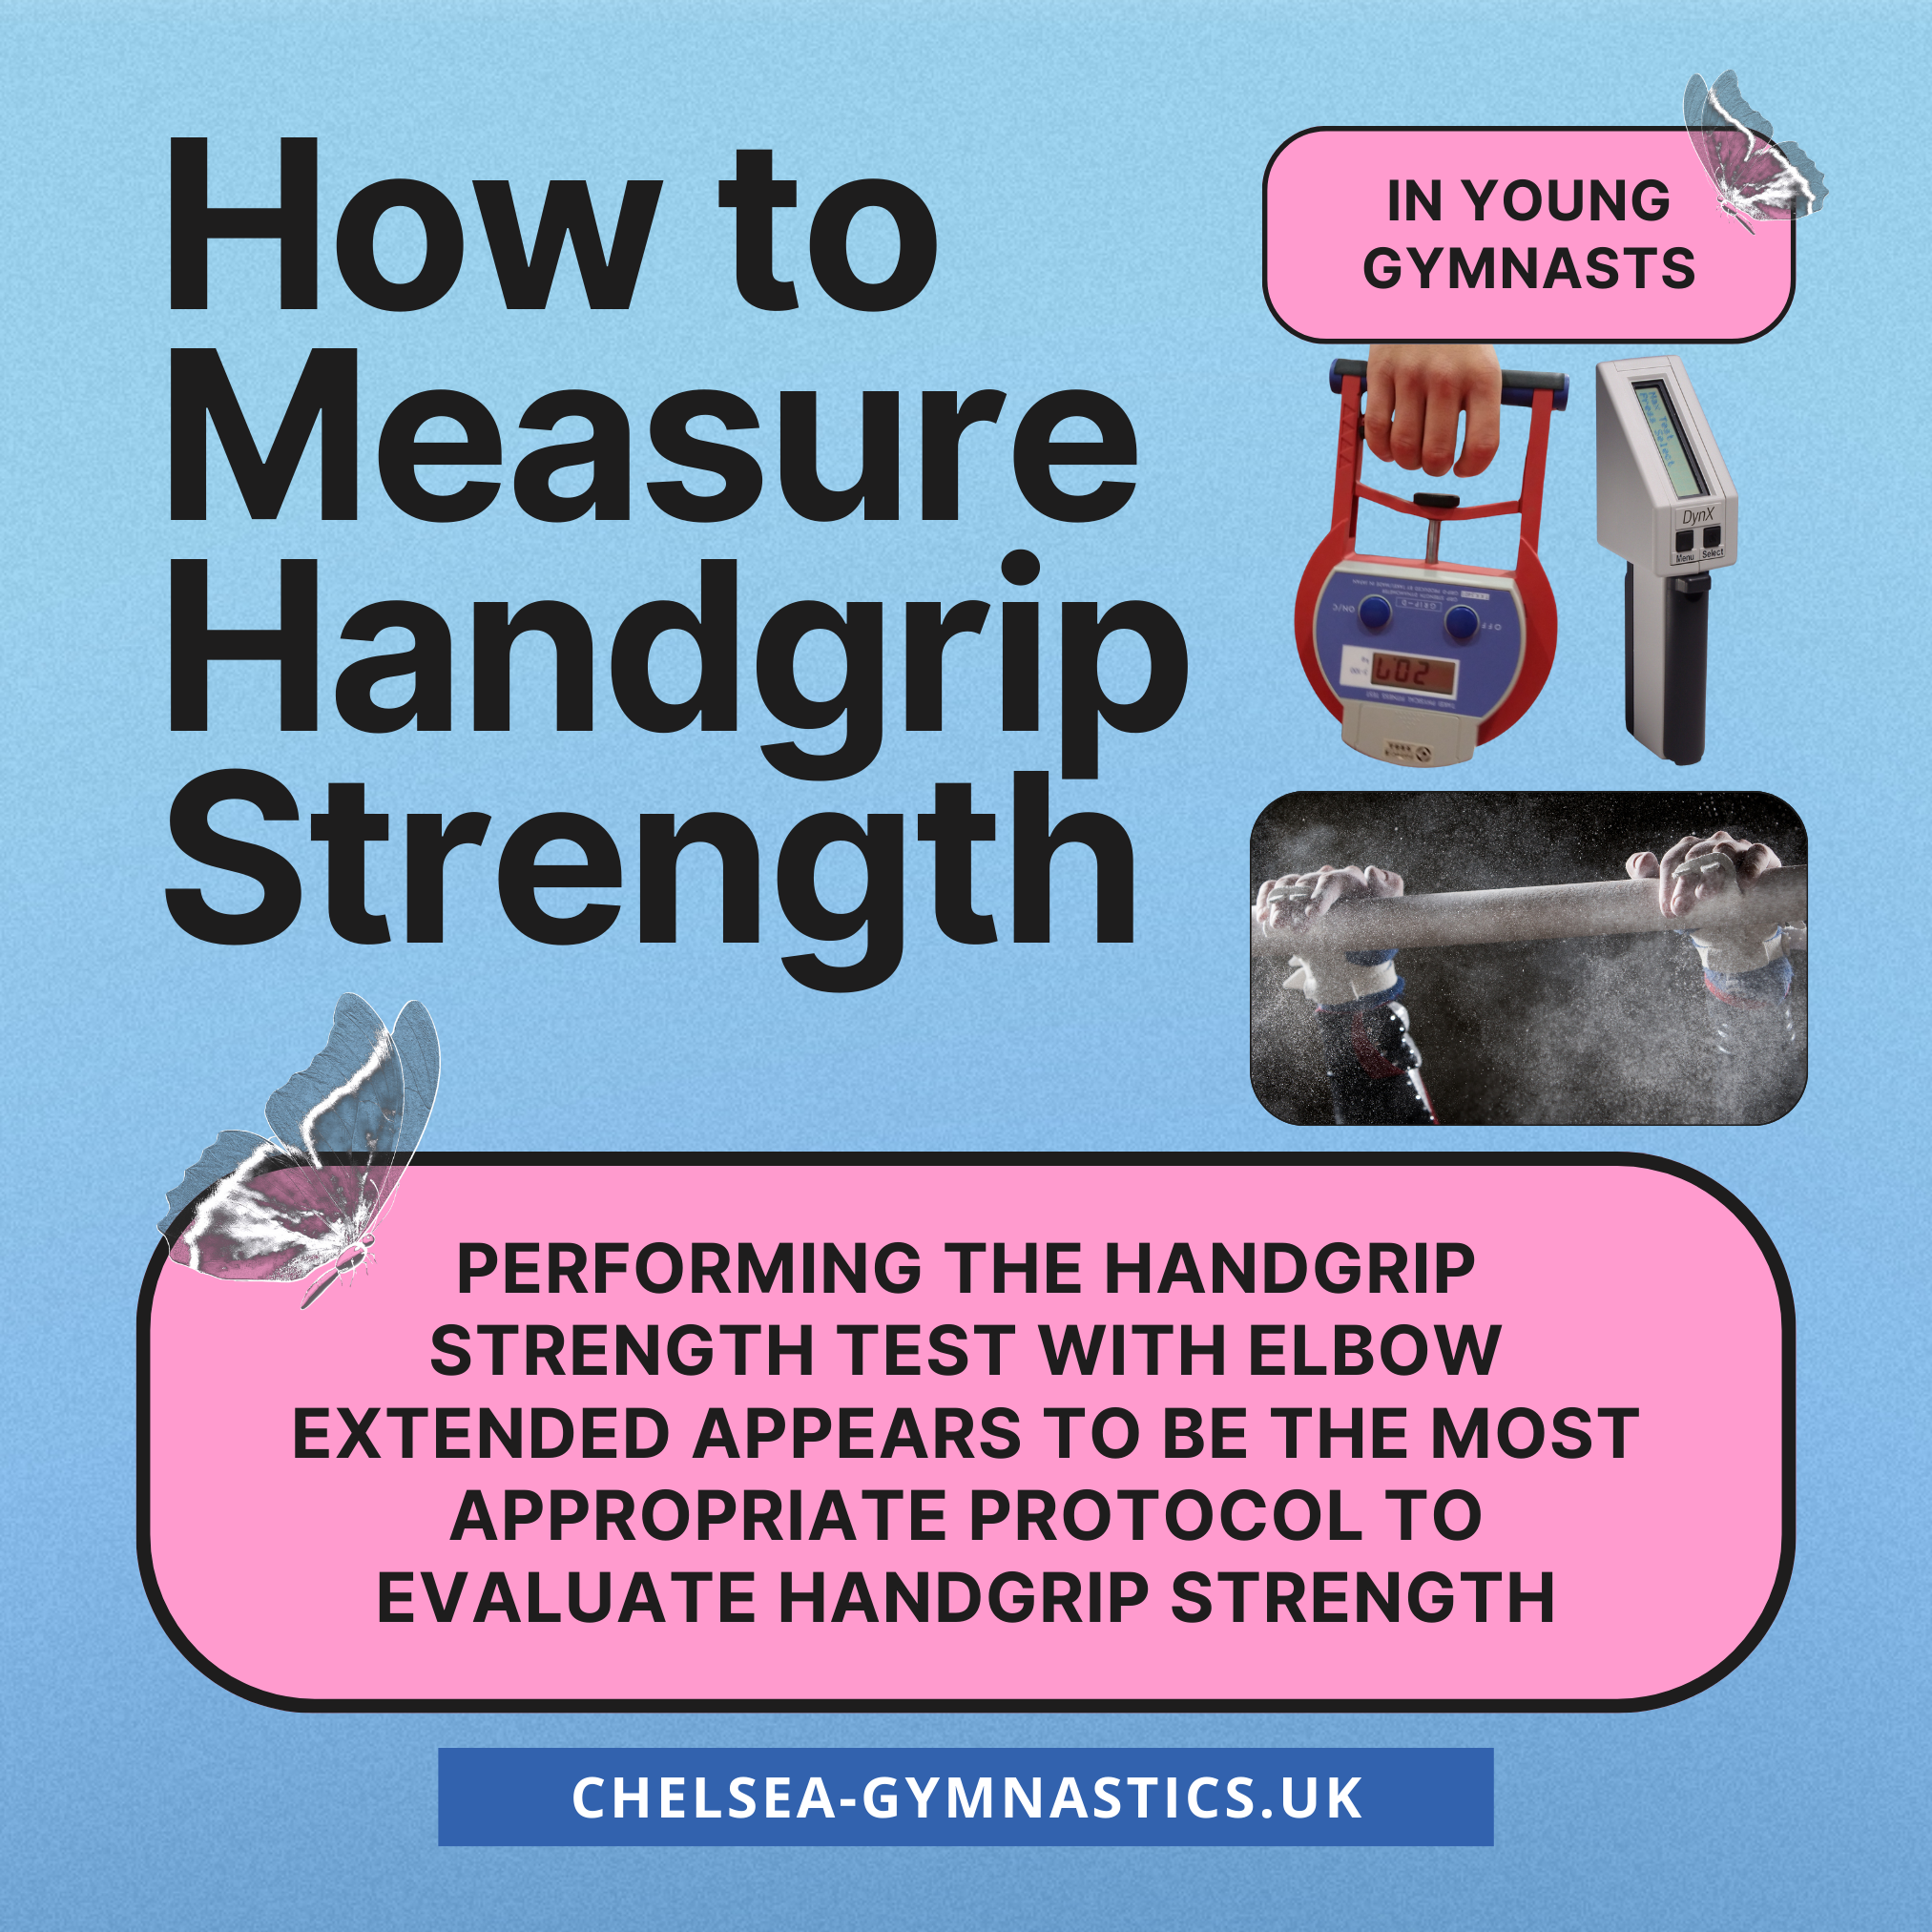 How to measure Handgrip Strength in gymnasts?